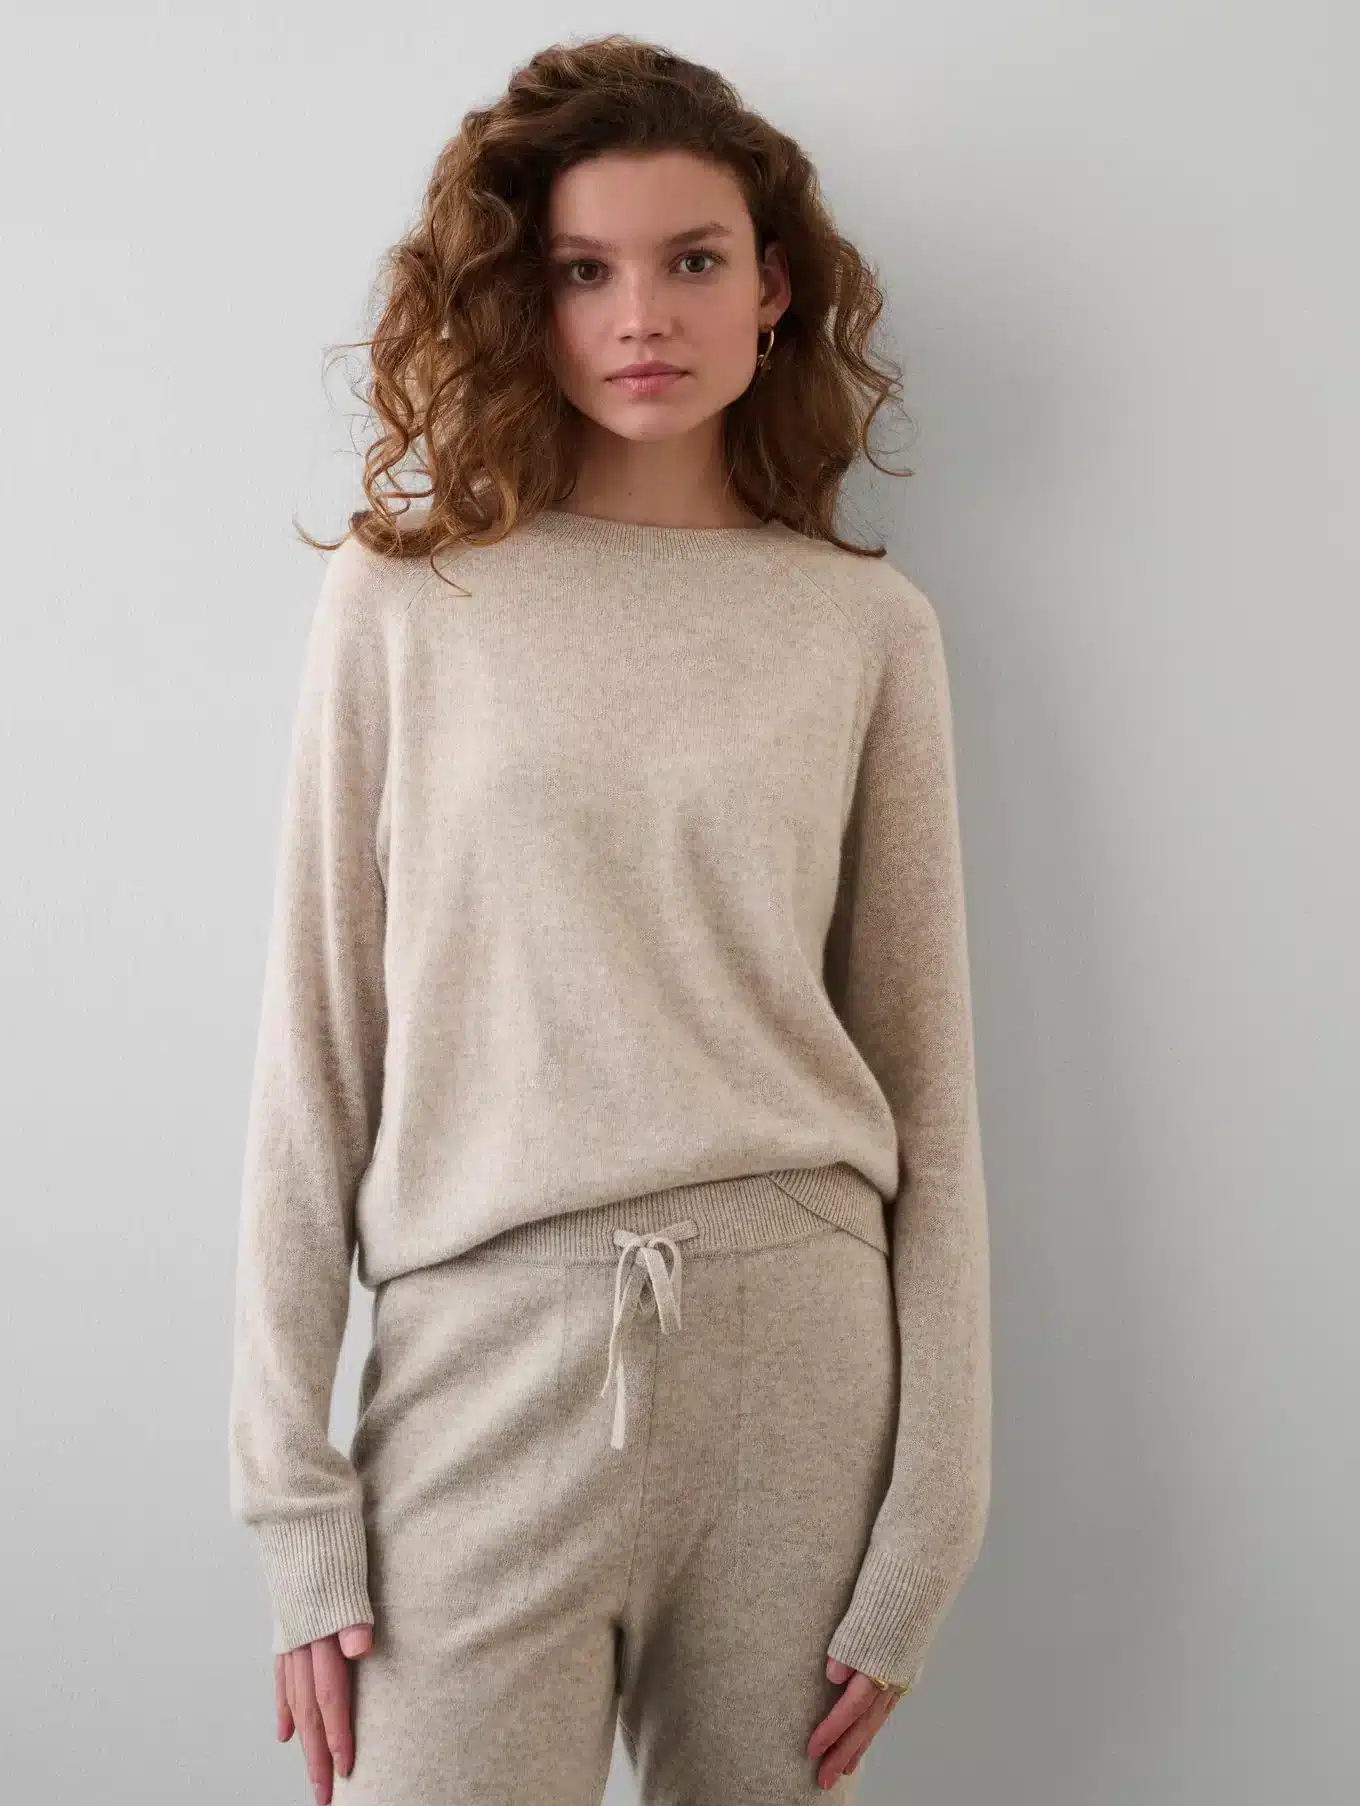 Cashmere sweater and sweatpants by White and Warren